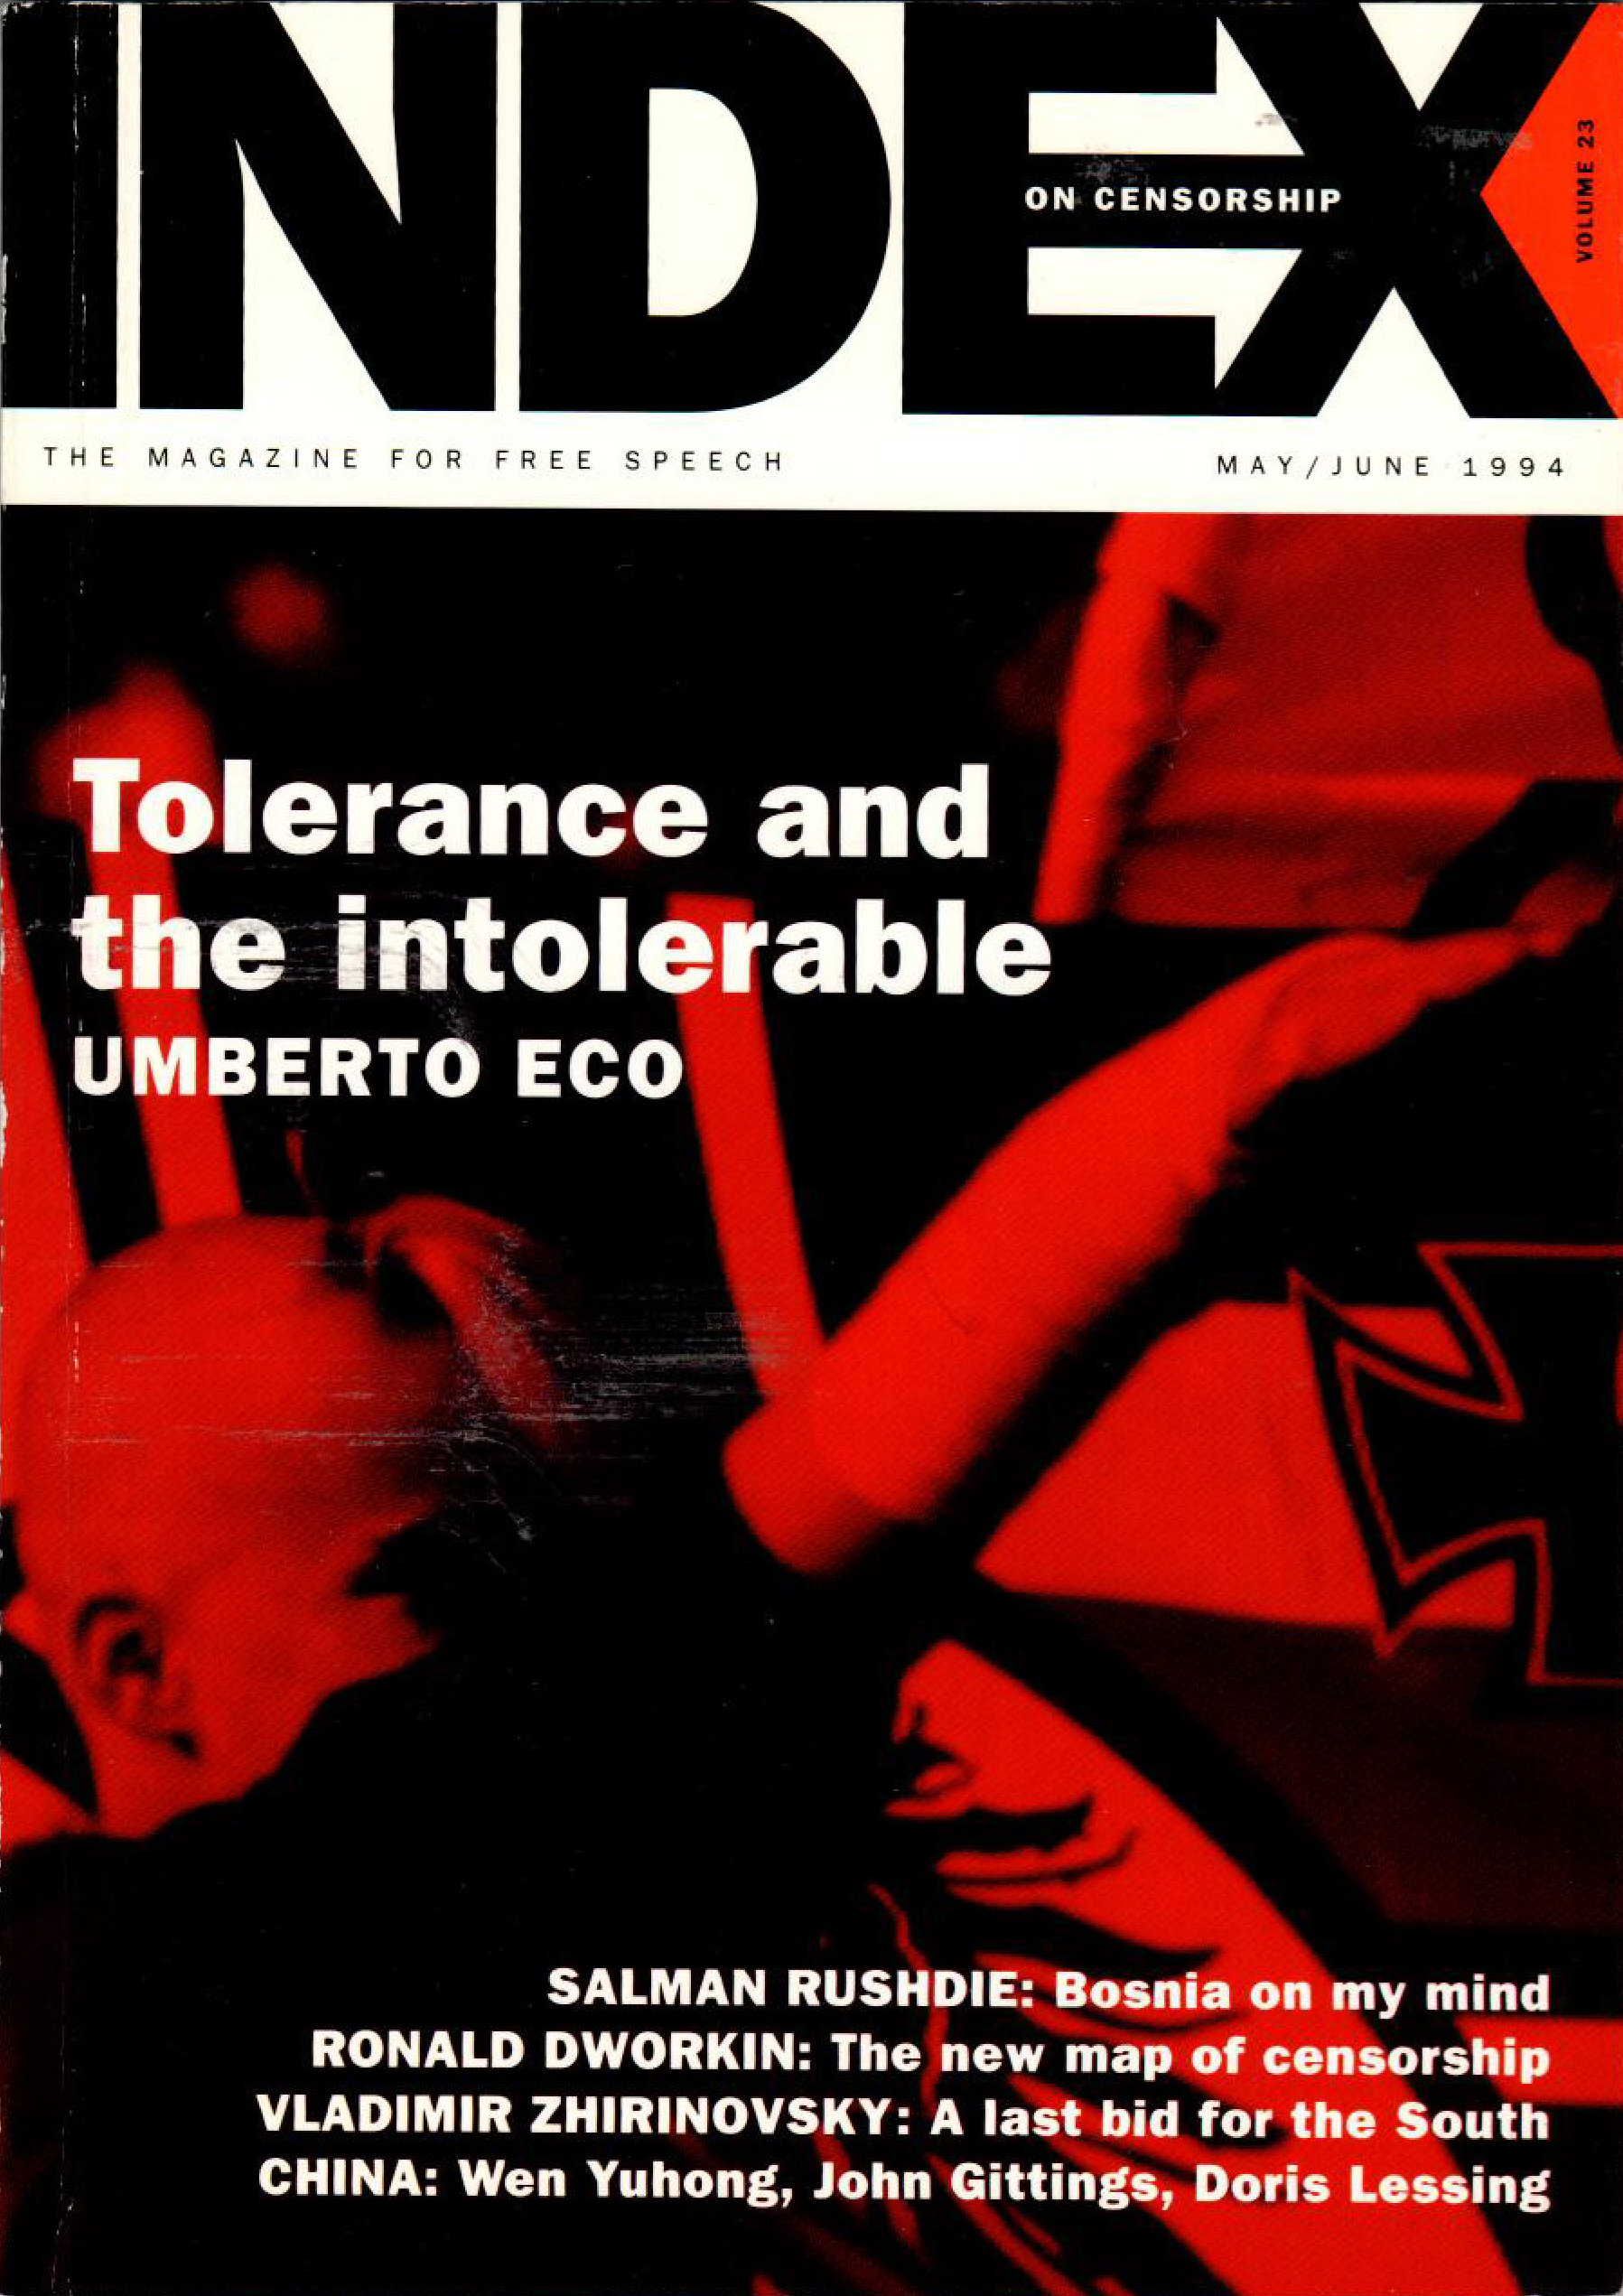 Tolerance and the intolerable, the May 1994 issue of Index on Censorship magazine